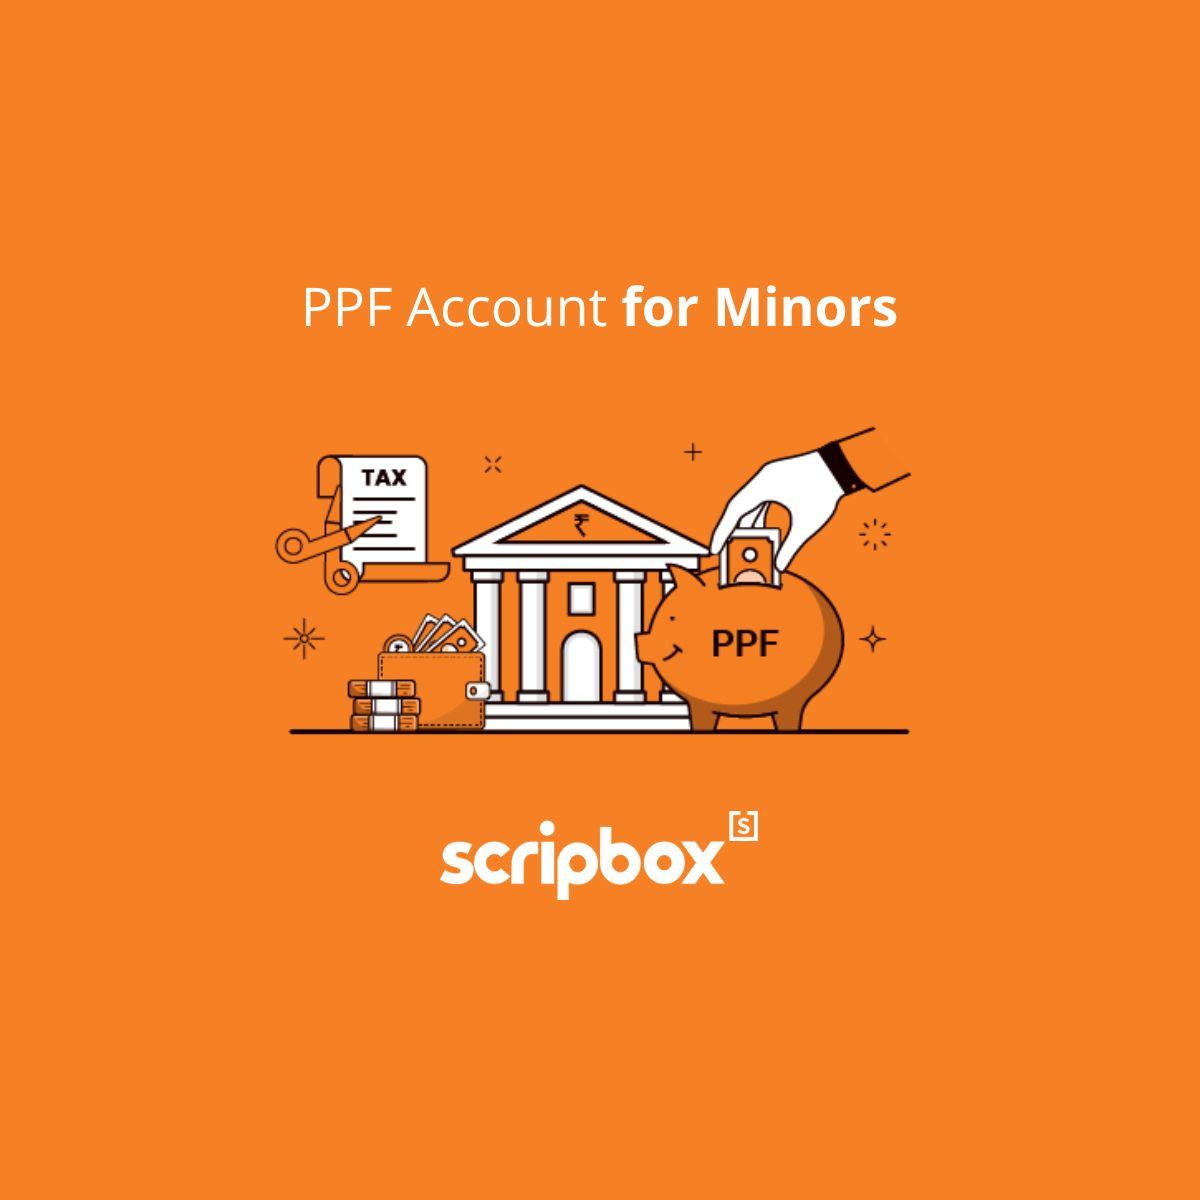 ppf-account-for-minors